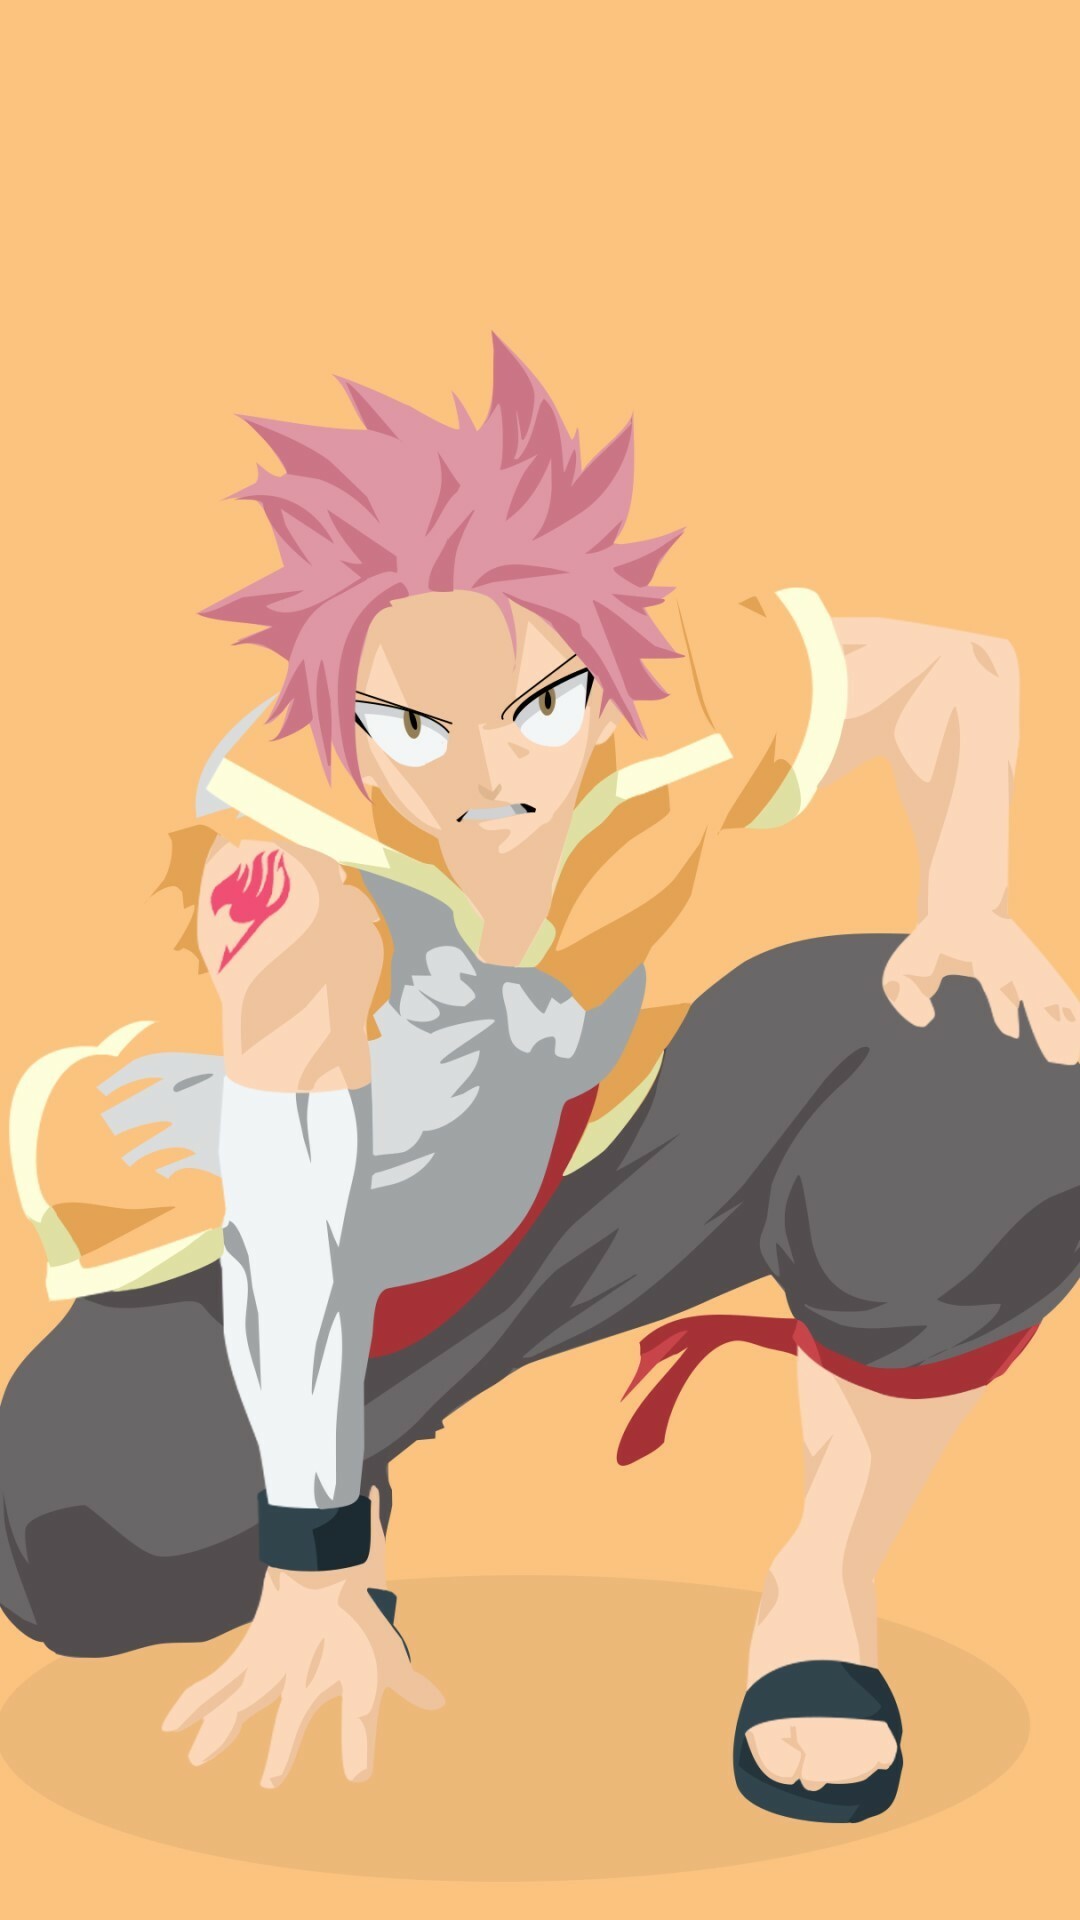 Fairy Tail: Natsu Dragneel, becomes the Thunder-Fire Dragon, Anime. 1080x1920 Full HD Background.